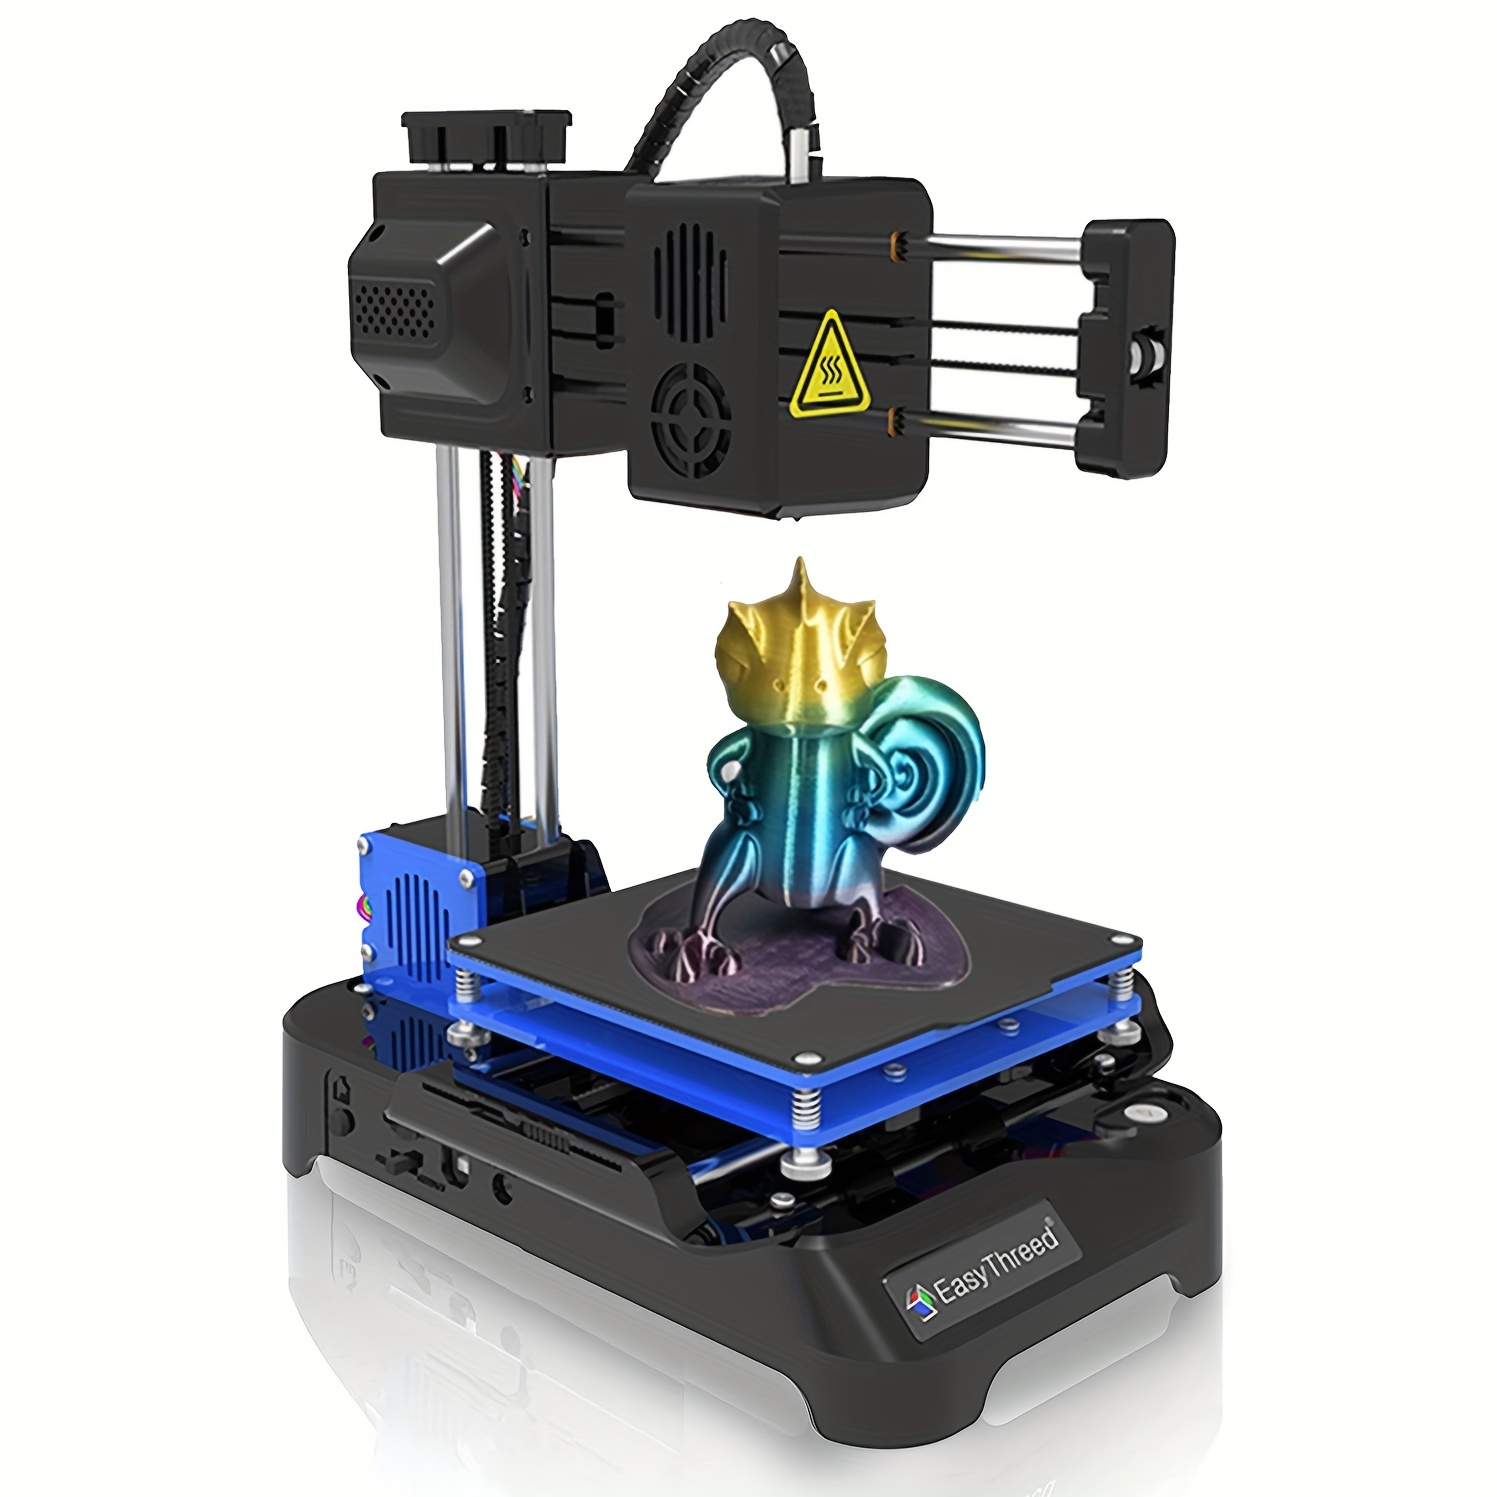 EasyThreed Mini 3D Printer Beginners Entry Level Fast Heating Low Noise with Free PLA TPU.75mm Filament Printing $8.74